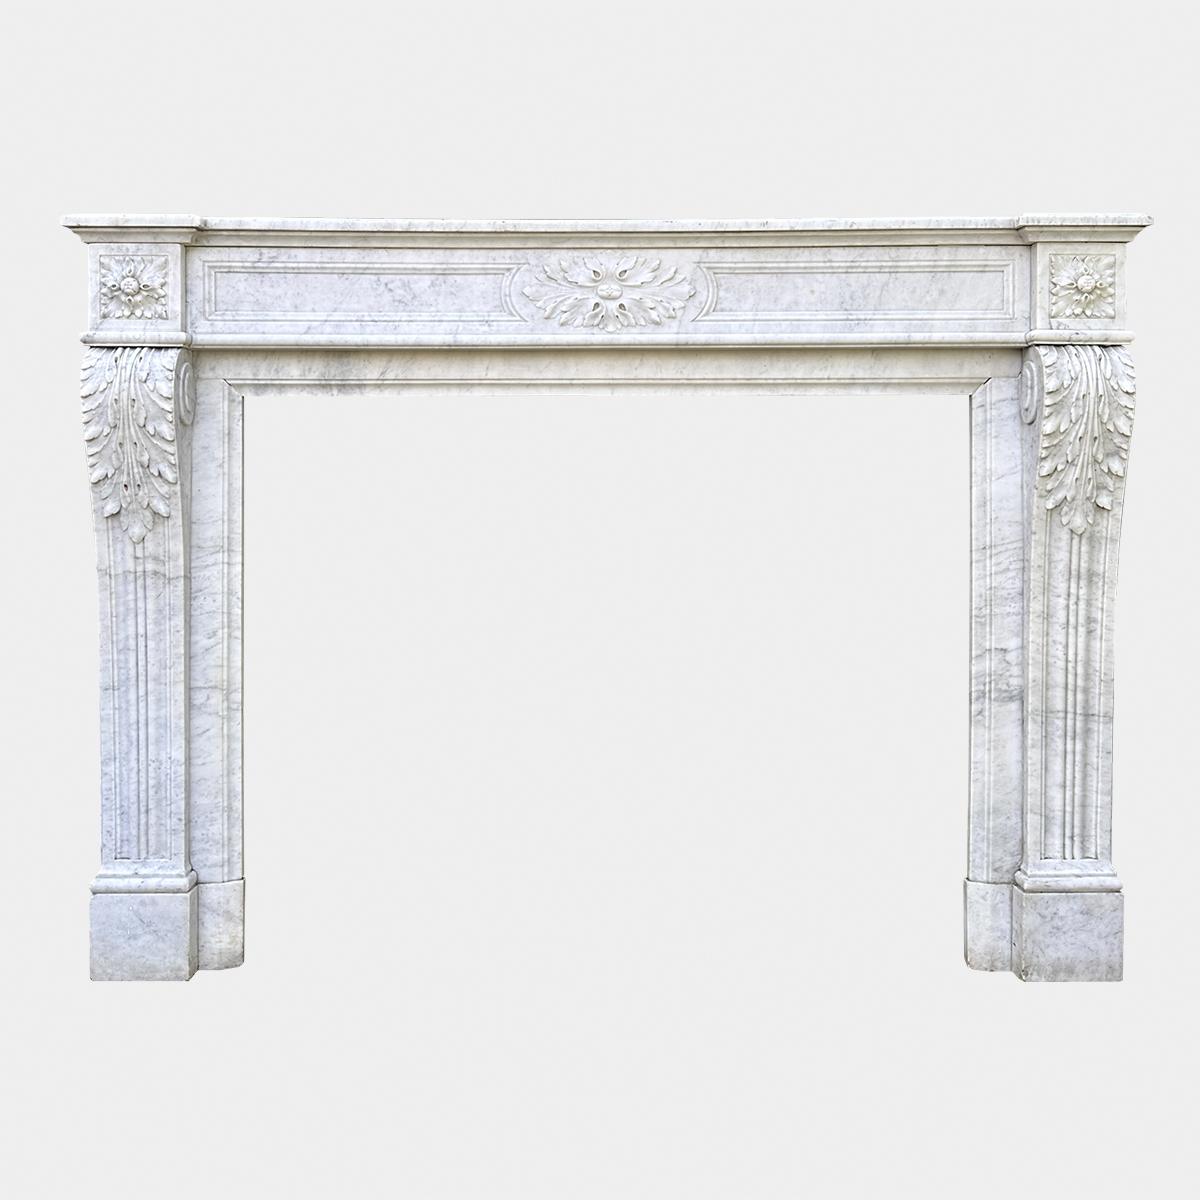 A large Louis XVI style Carrara Marble fireplace dated from the mid 19th century. The console jambs with carved acanthus and tapering panels, with square Patarae corner blocks. The frieze with centre Patarae flanked by fielded panels. The side